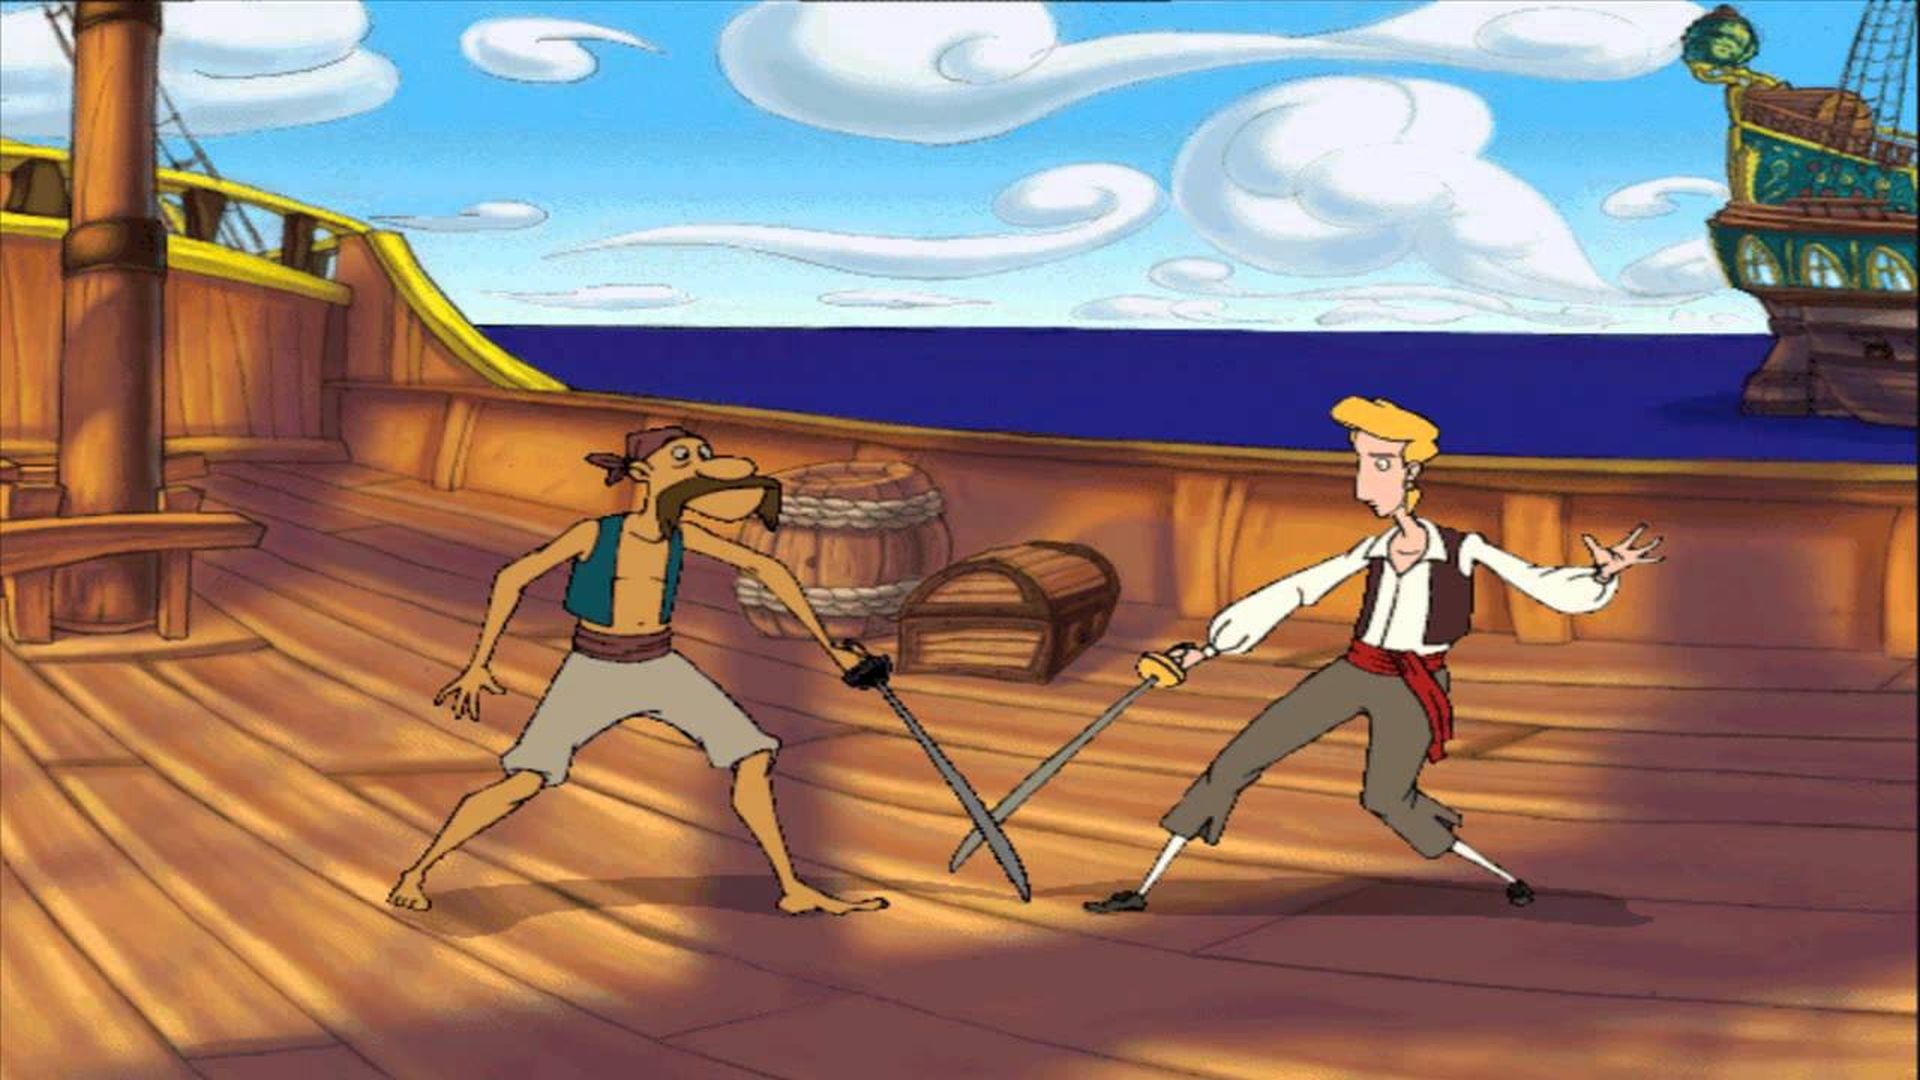 Best Pirate games: Guybrush Threepwood, a mighty pirate, is fighting a rather unassuming swashbuckler on board their ship.